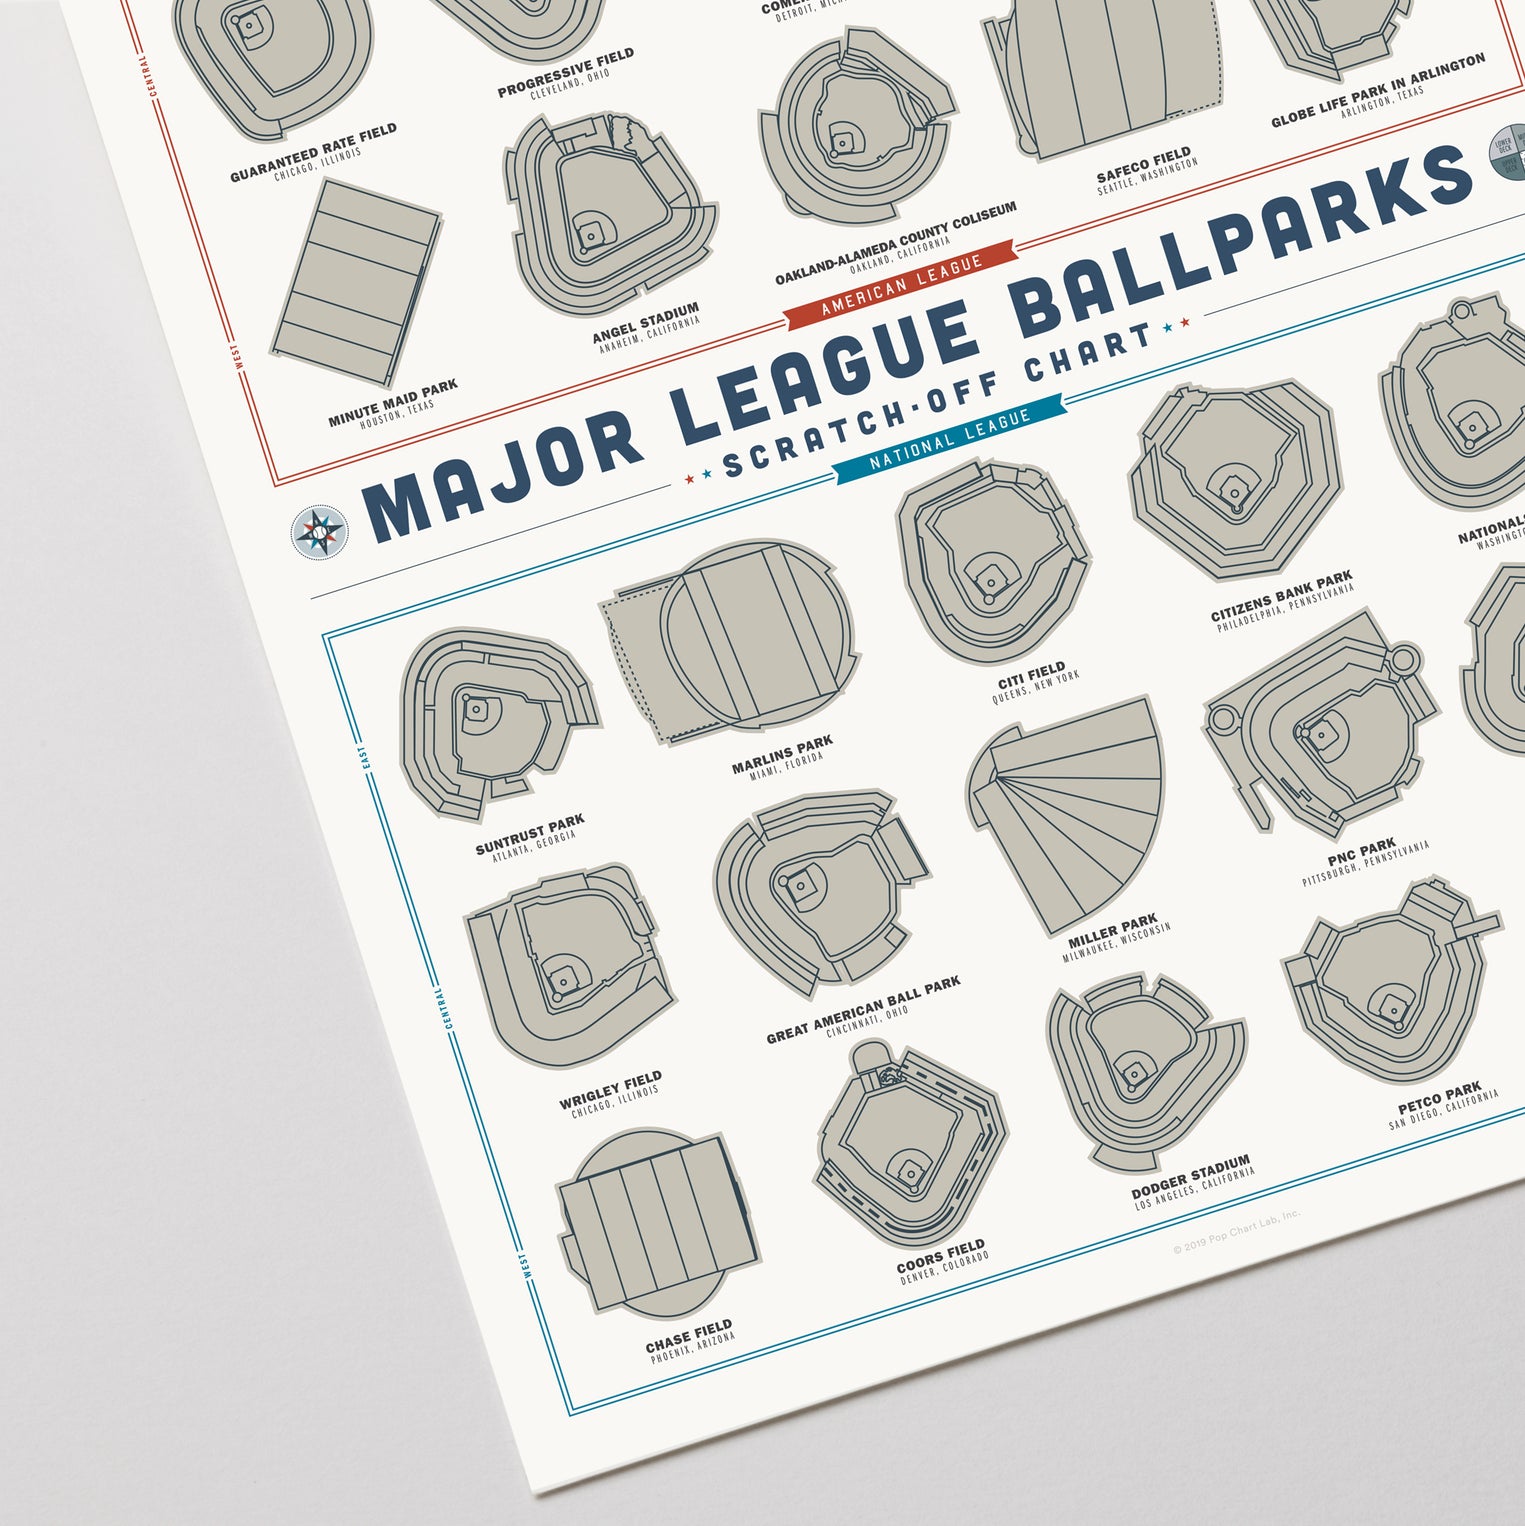 Been There Done That MLB Ballpark T-shirt Ballpark Map 